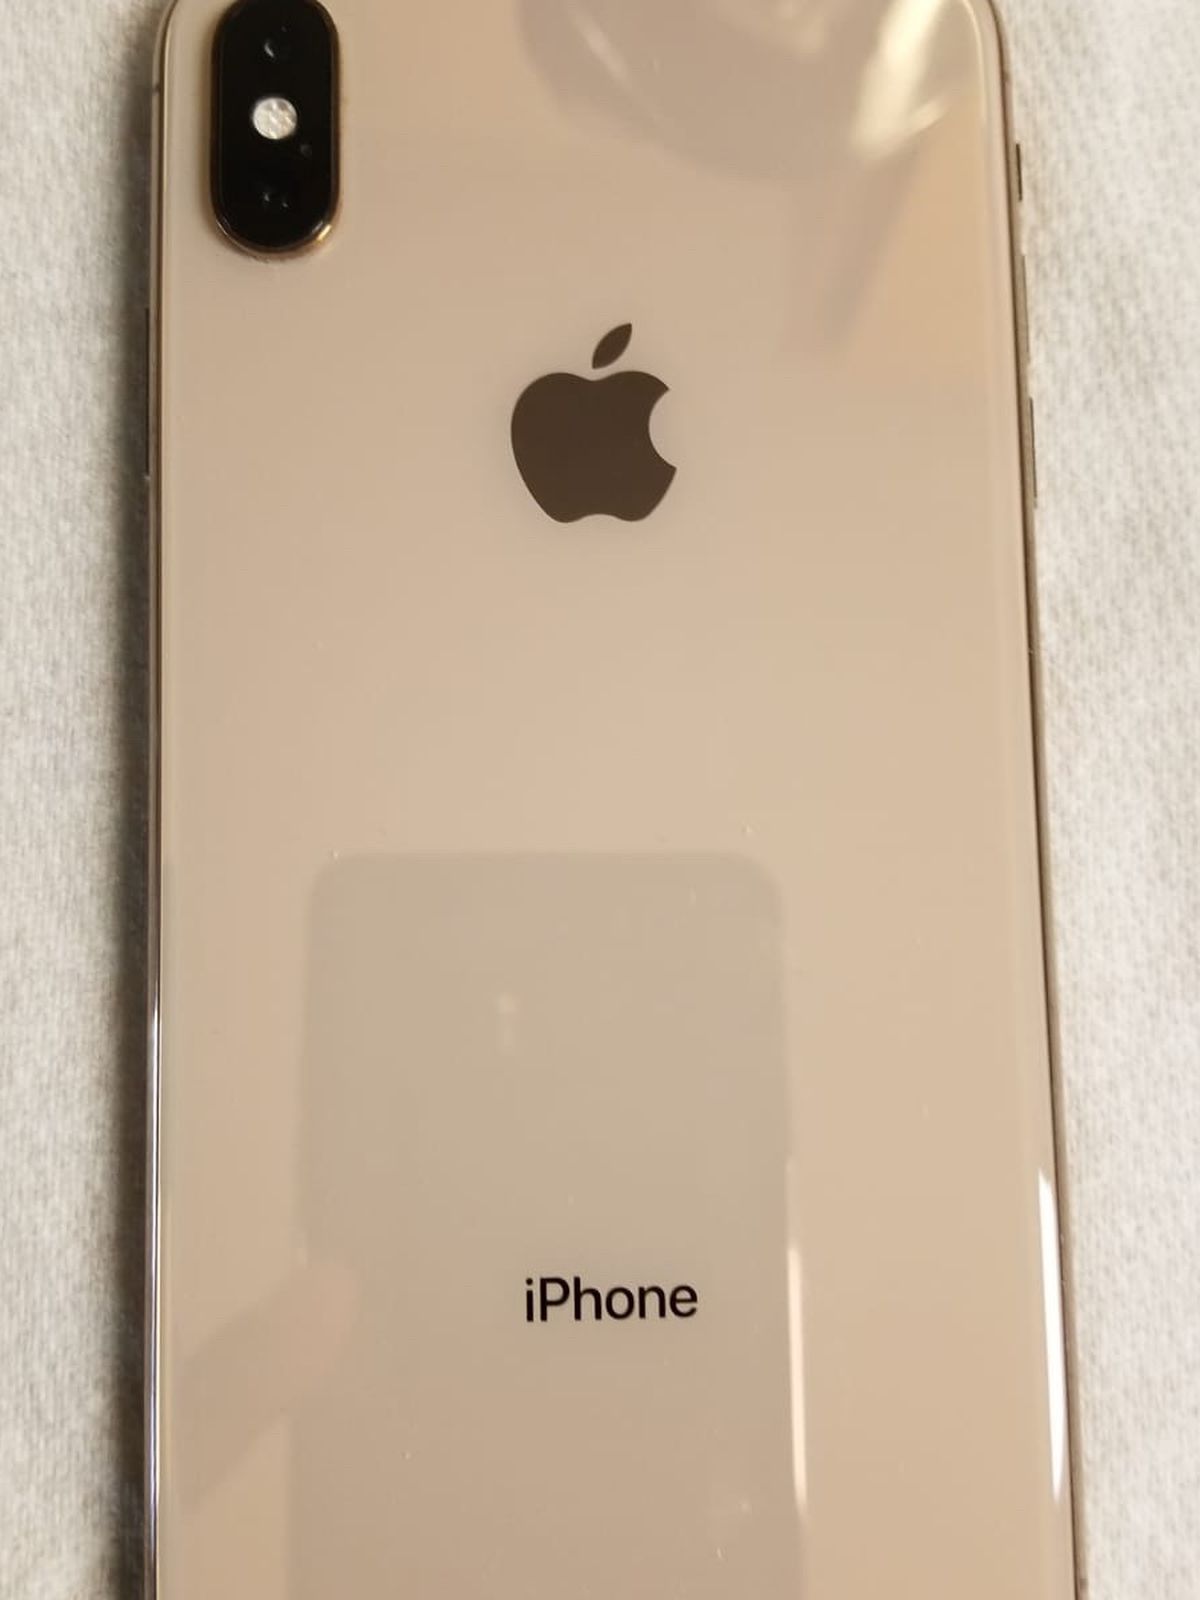 iPhone XS Max Factory Unlocked Mint Condition Everything Works Perfectly 256 GB